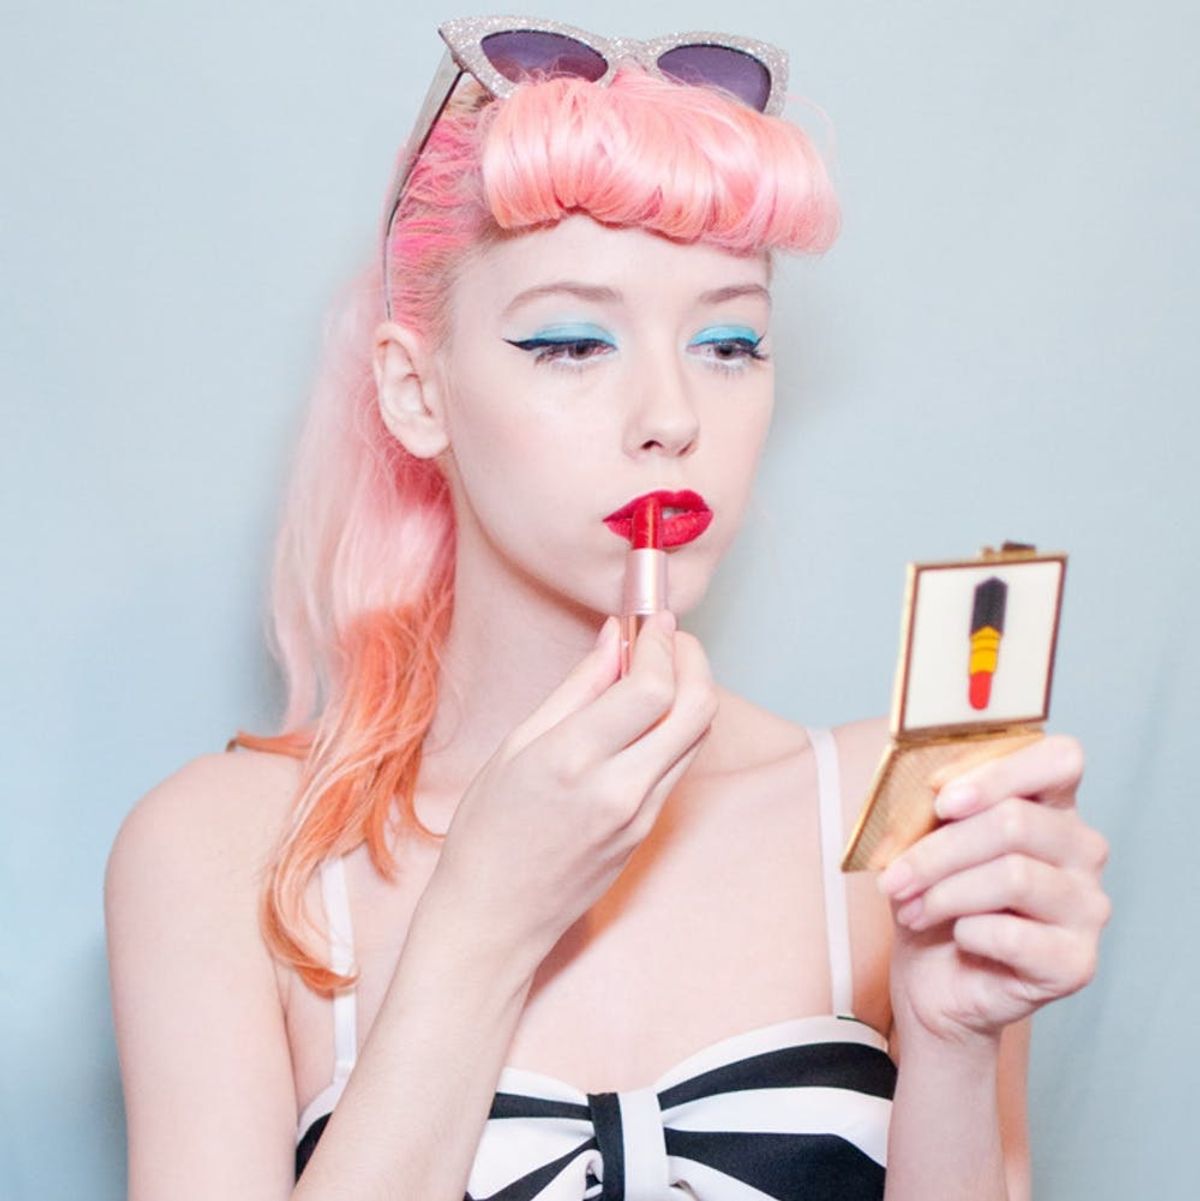 Pink Hair, Don’t Care: This Style Blogger Is Your New Retro Inspiration